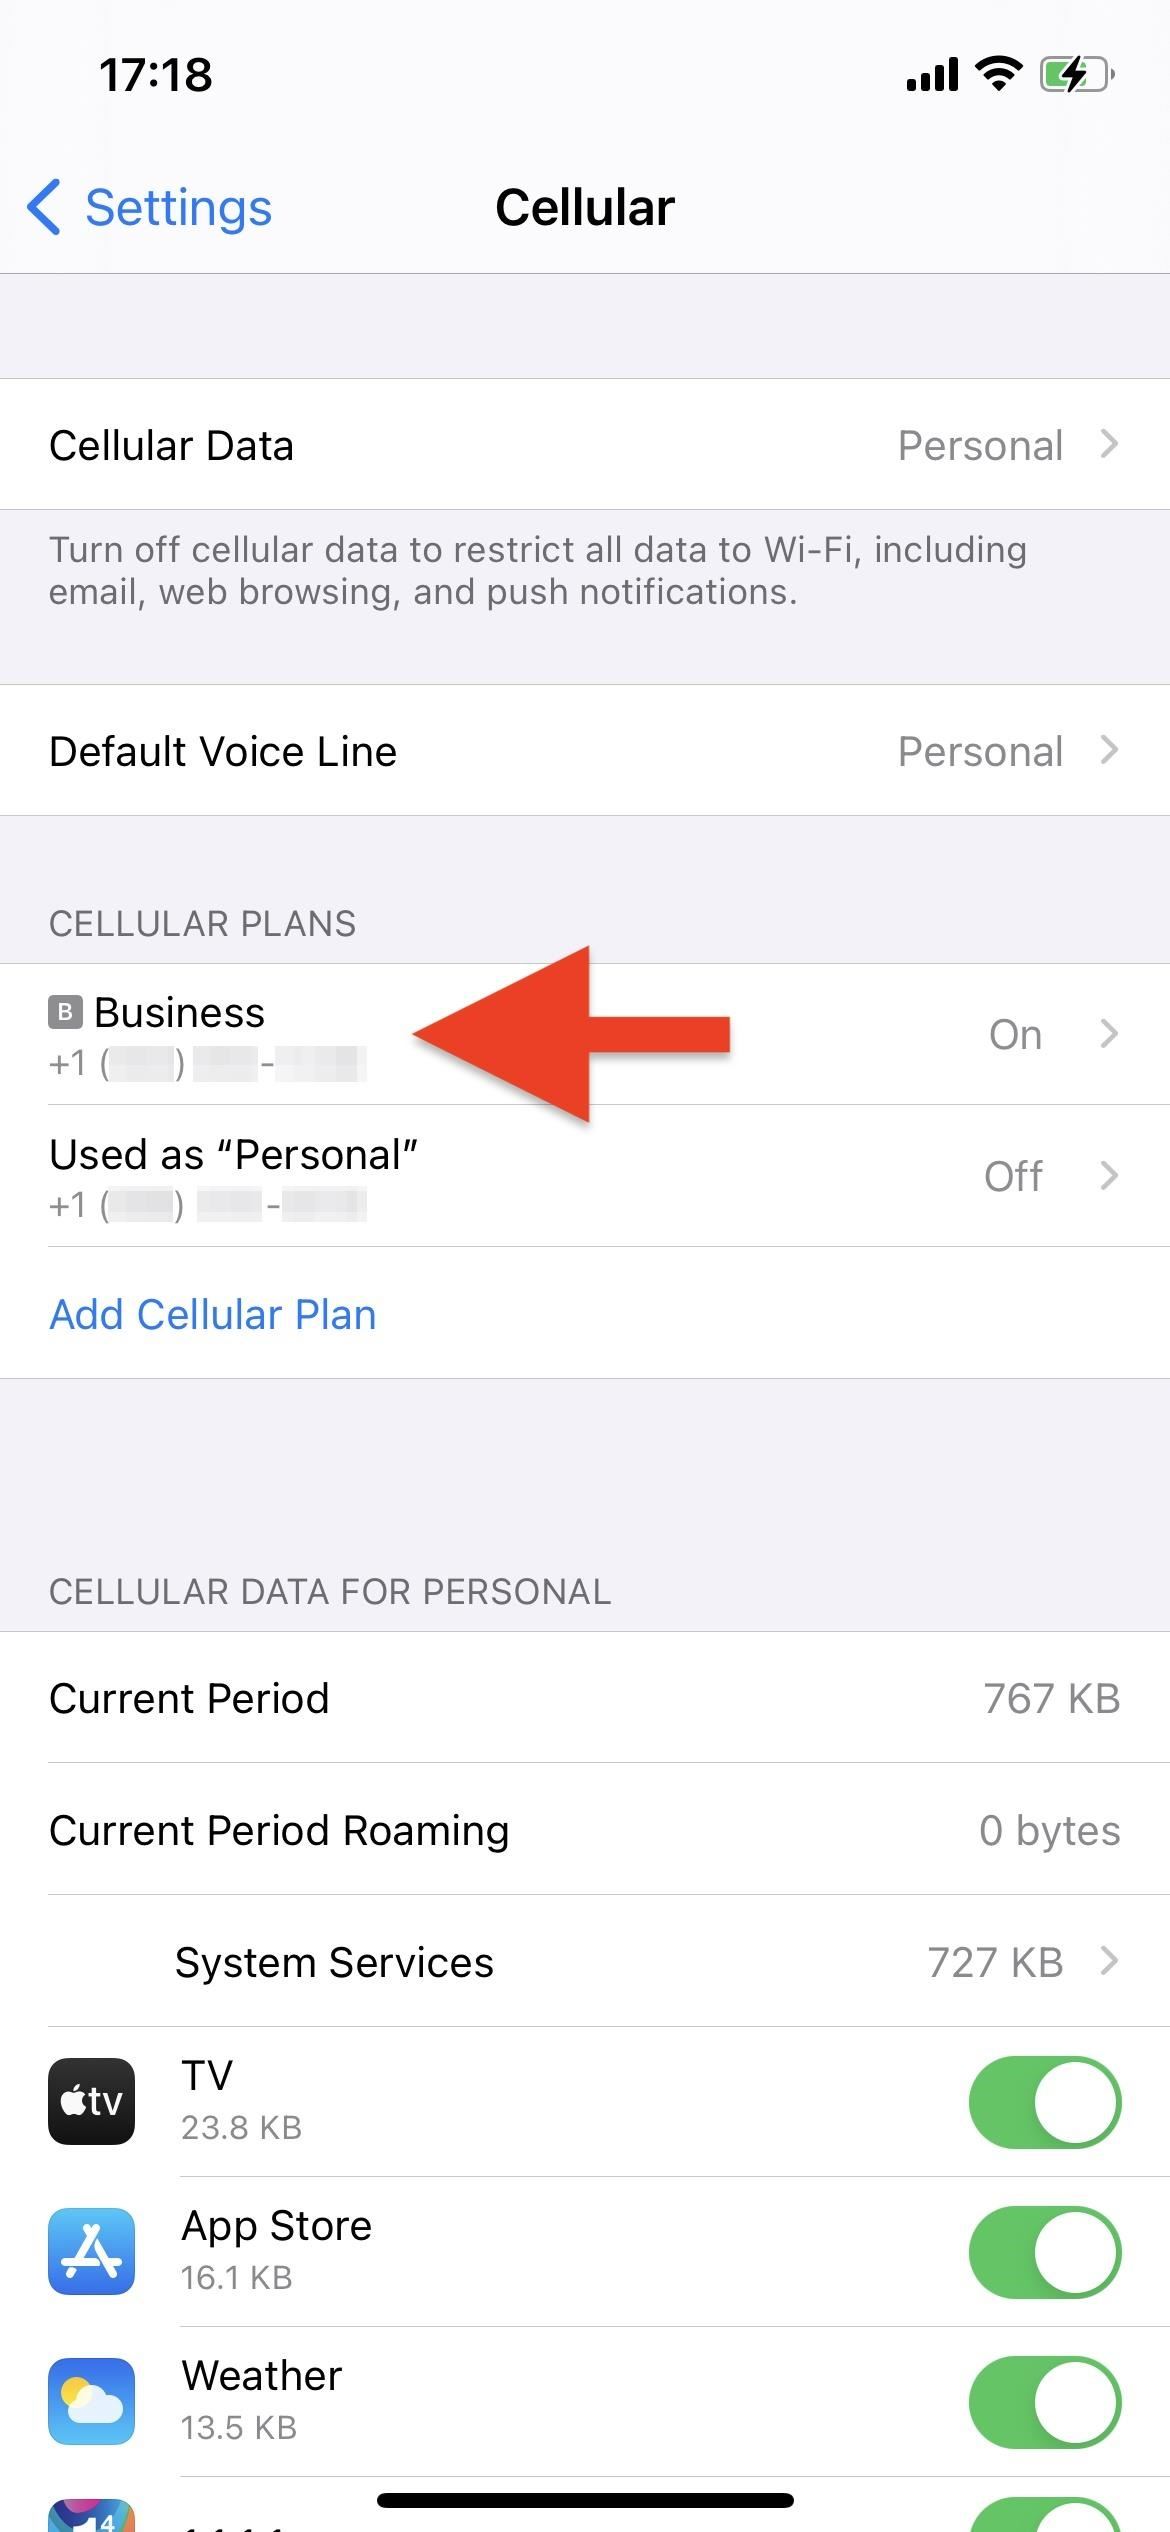 5G Data Won't Work on Your New iPhone 12 or 12 Pro Unless You Do This